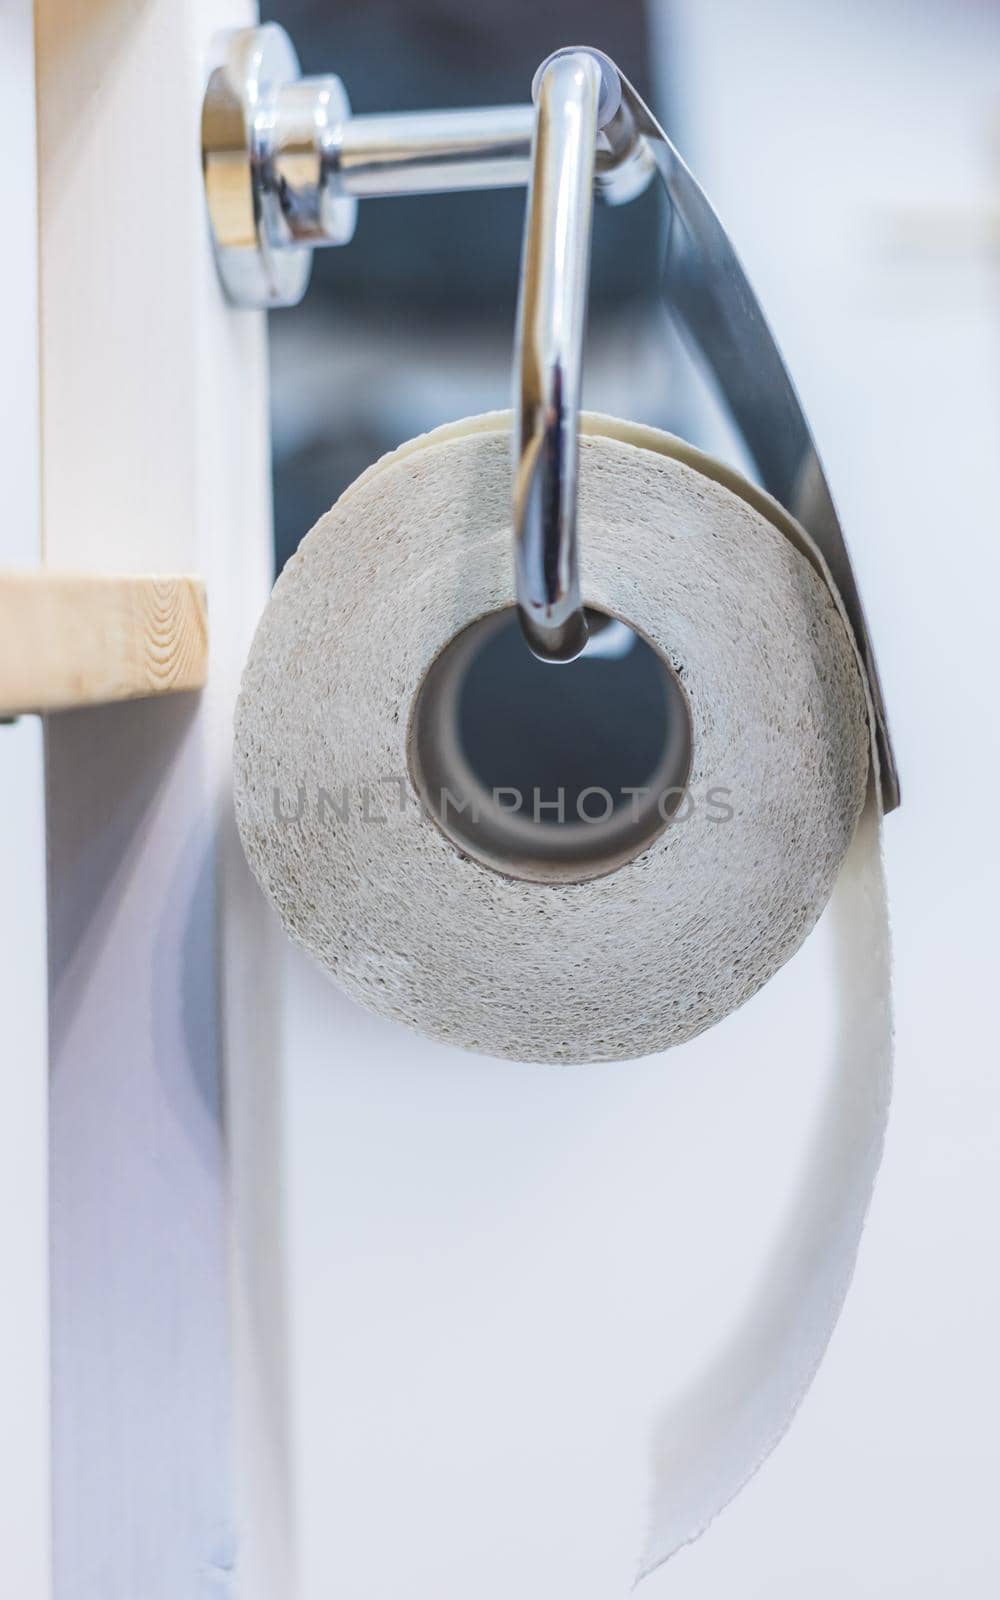 Close up of toilet paper roll on chrome hanger